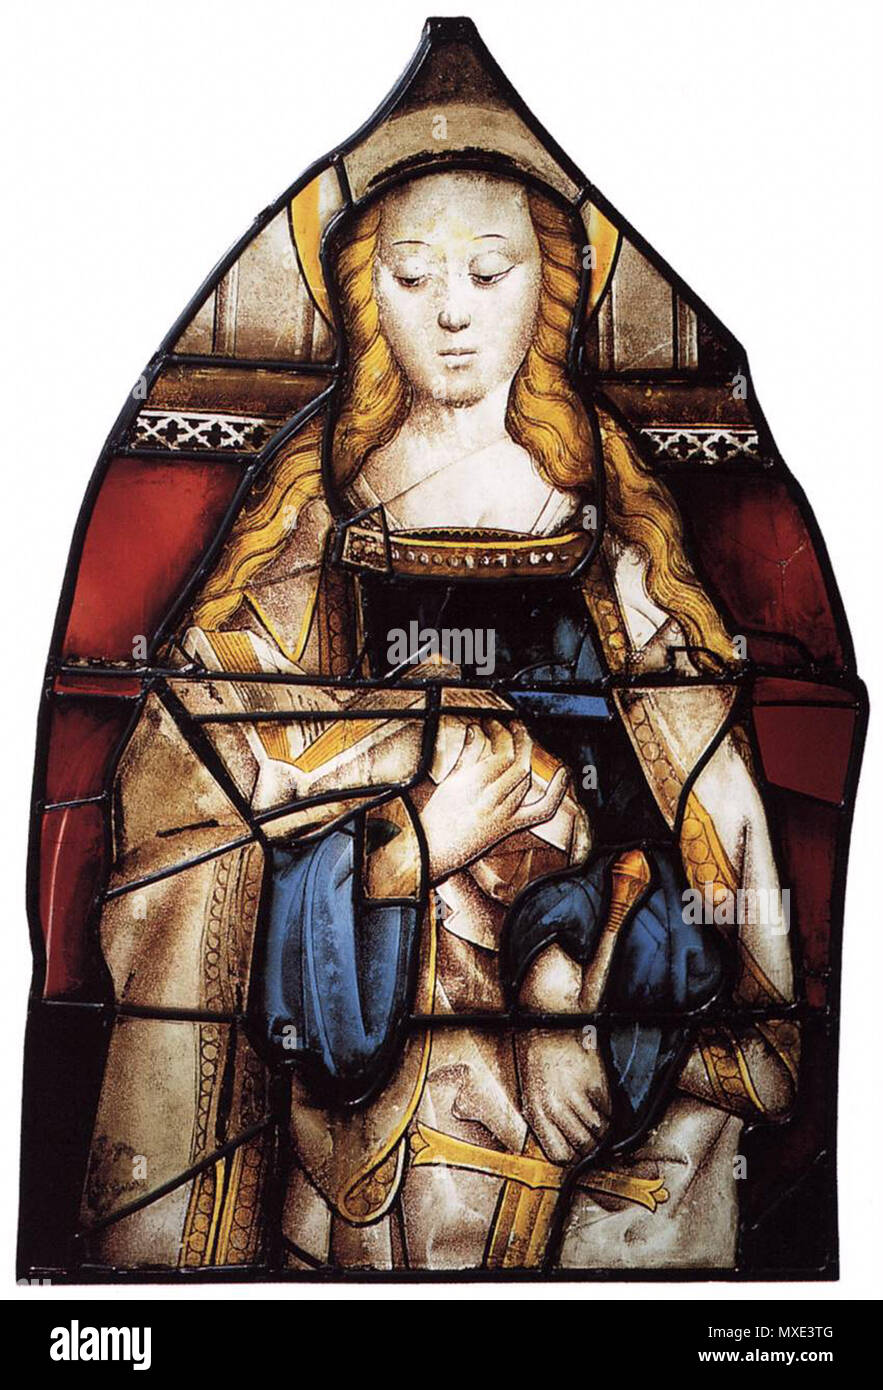 English: St Catherine. Leaded glass. 92 × 58 cm. Amsterdam, Rijksmuseum  Amsterdam, Stained Glass Windows collection (inv.no. BK-NM-10222).  Nederlands: De heilige Catharina. Glas in lood. 92 × 58 cm. Amsterdam,  Rijksmuseum